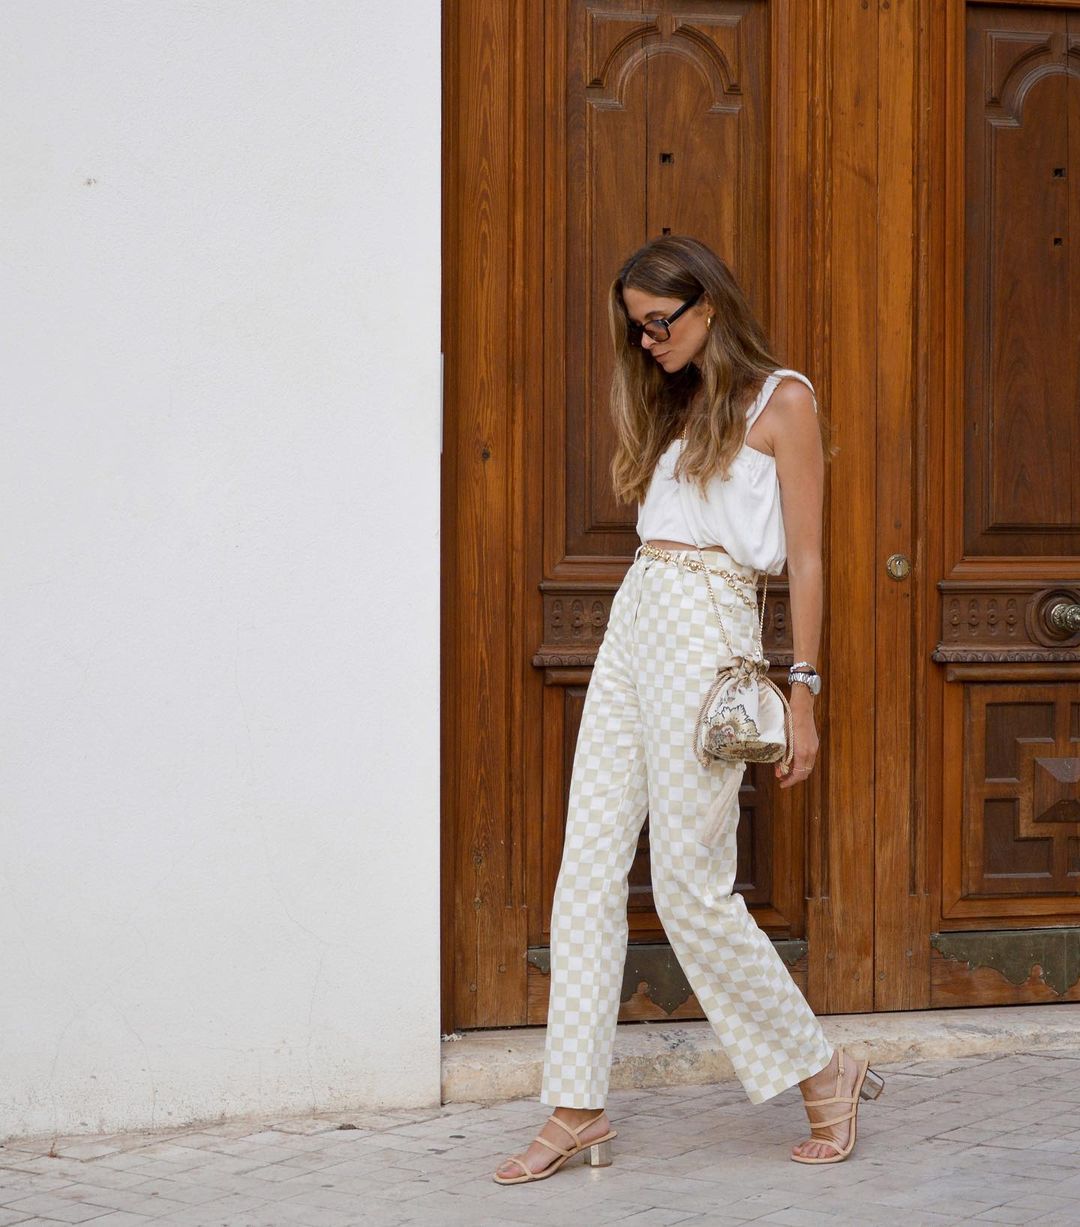 Chic Outfit Ideas With The Coolest Summer Handbags